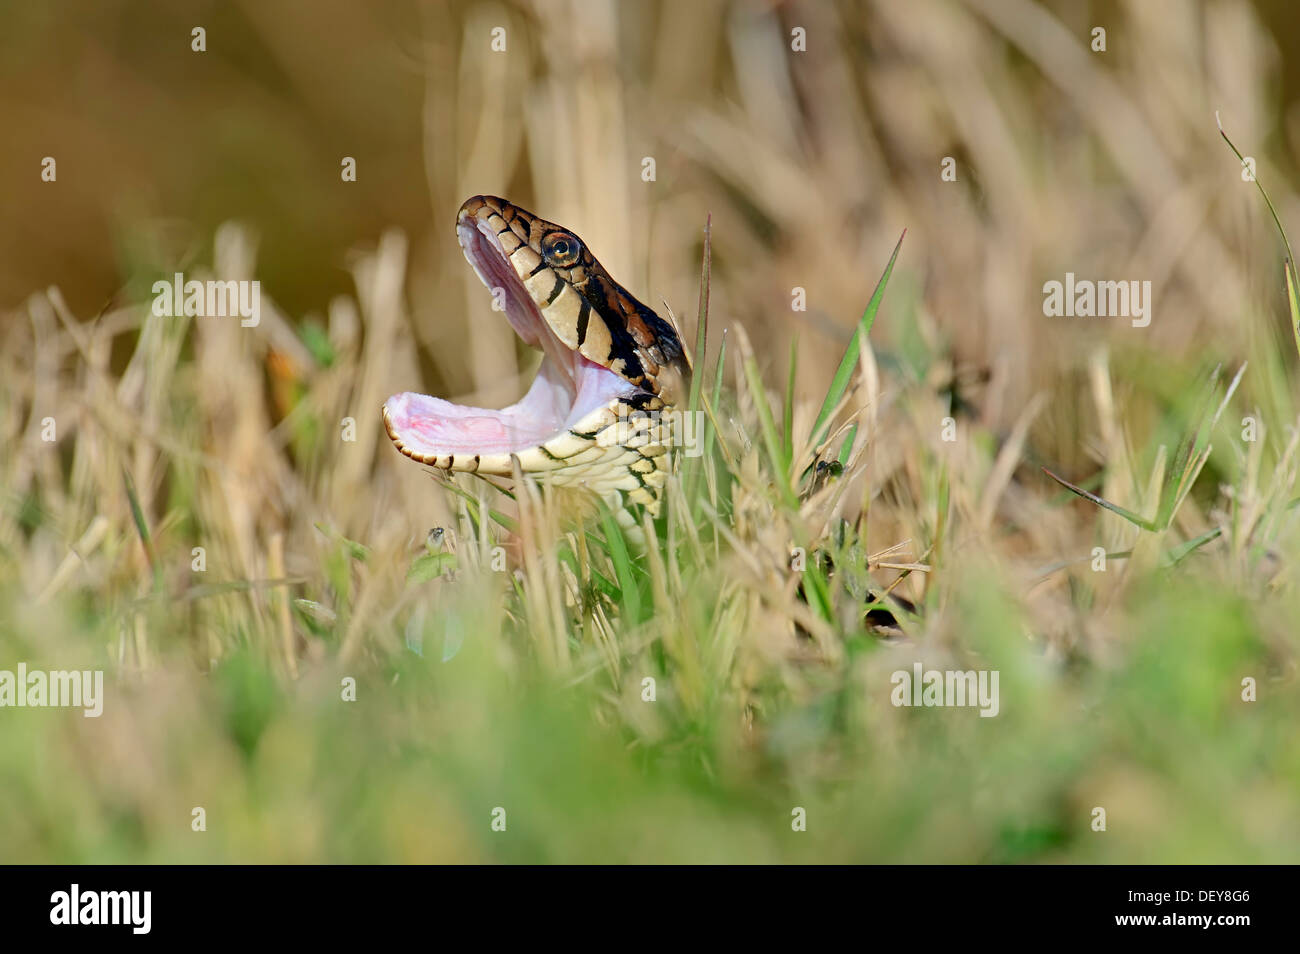 Florida Banded Water Snake (Nerodia fasciata pictiventris) with its mouth open, Florida, United States Stock Photo